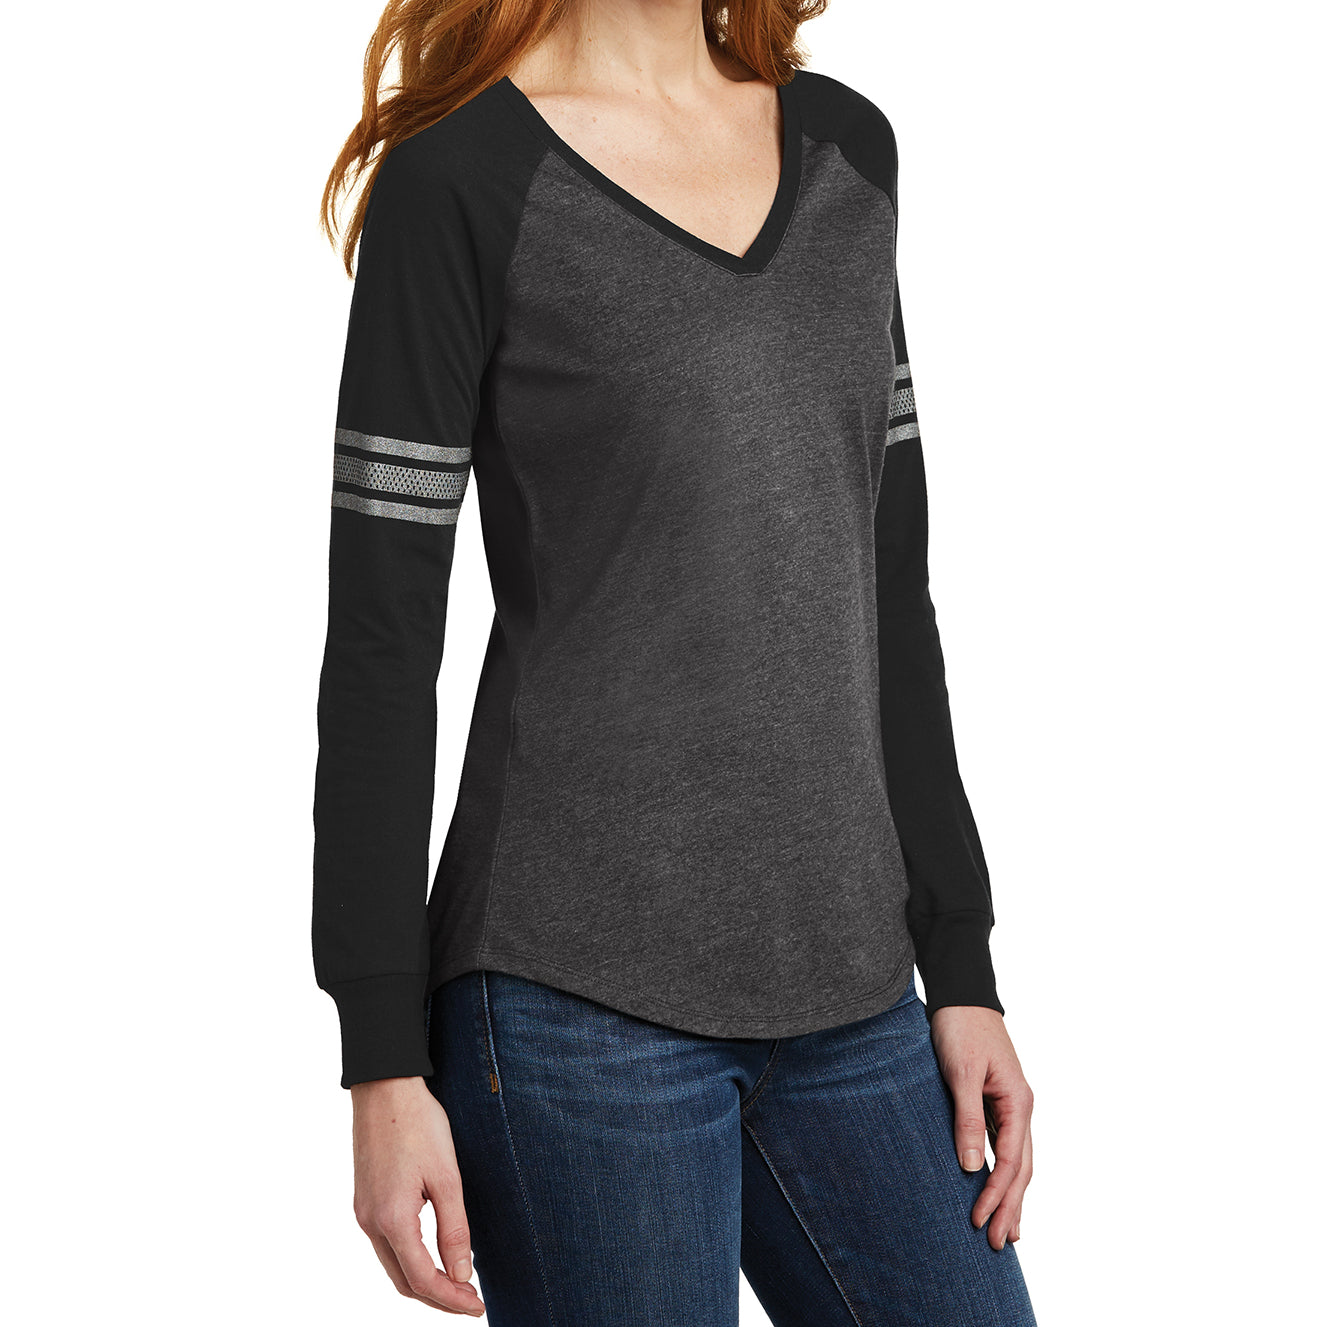 Women's Game Long Sleeve V-Neck Tee - Heathered Charcoal/ Black/ Silver -  Side